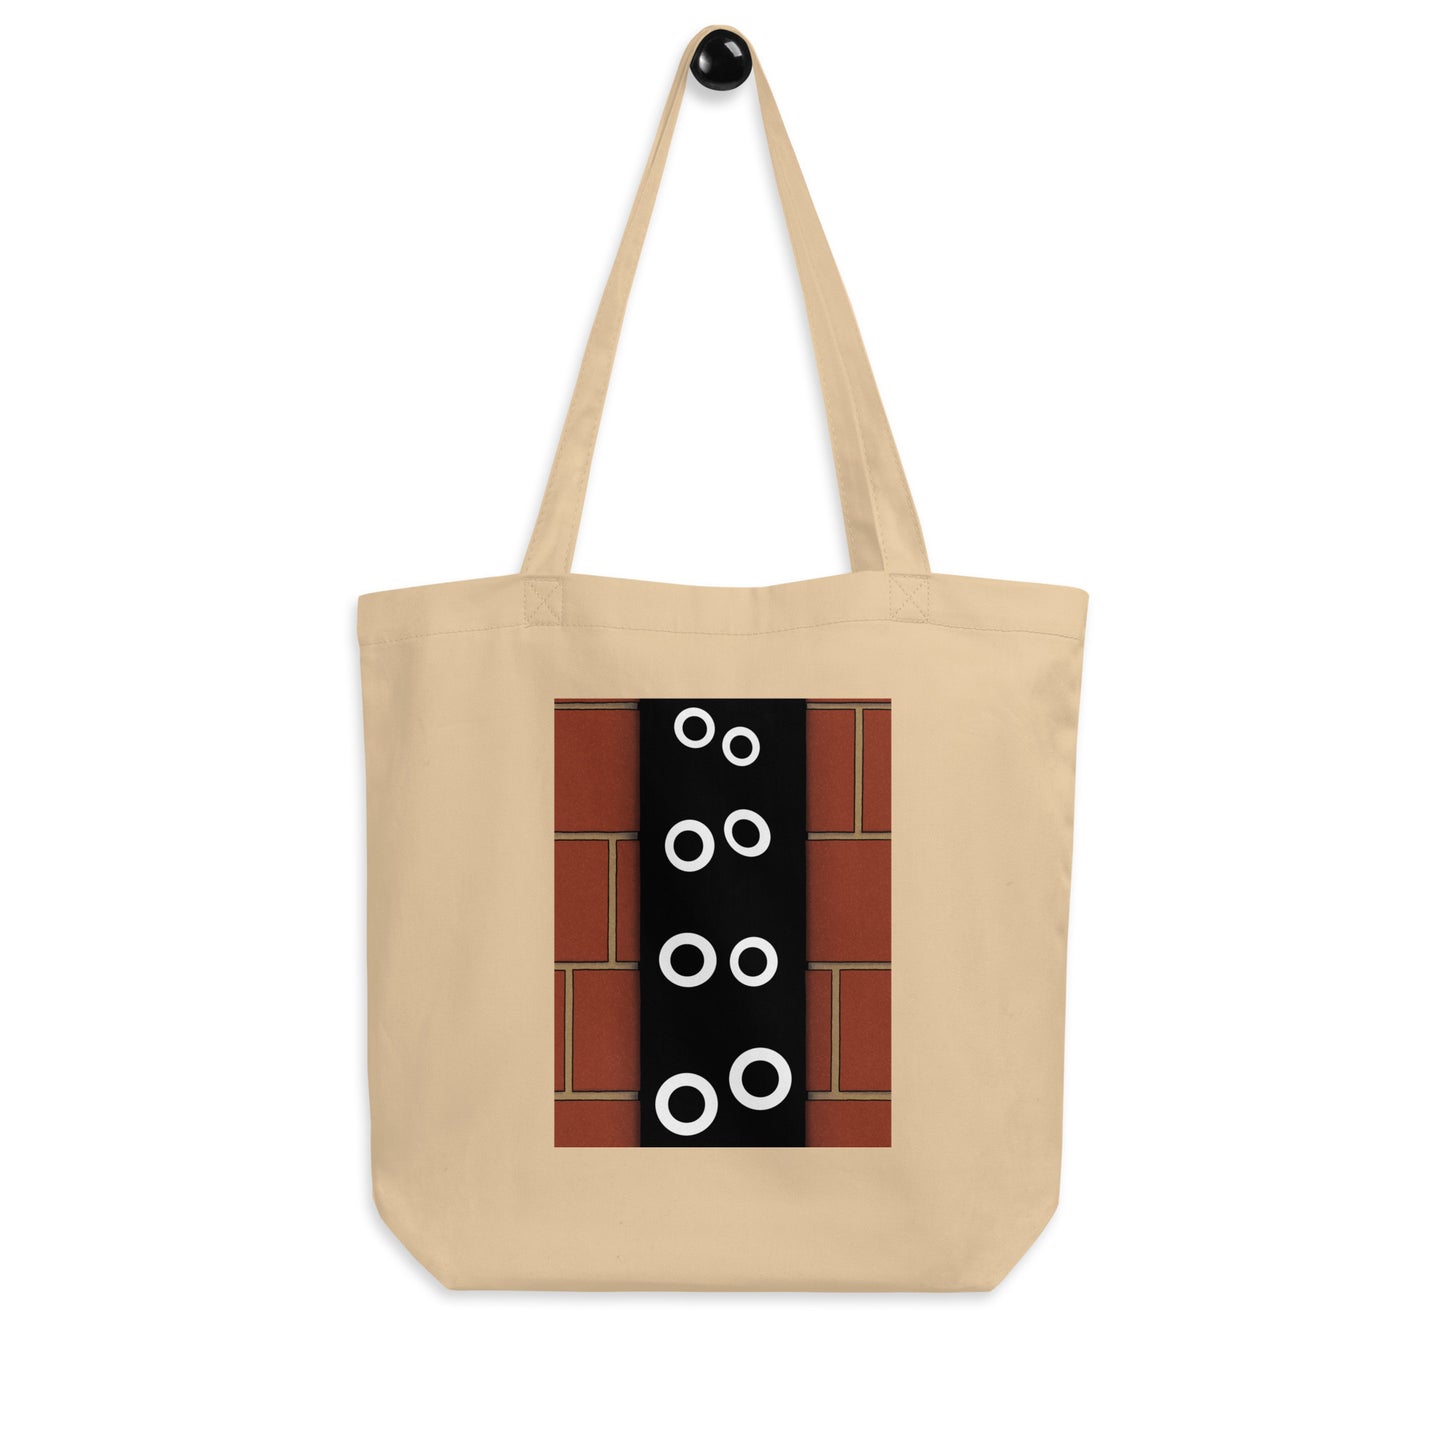 「The lurking guys」りょう／Tote Bag